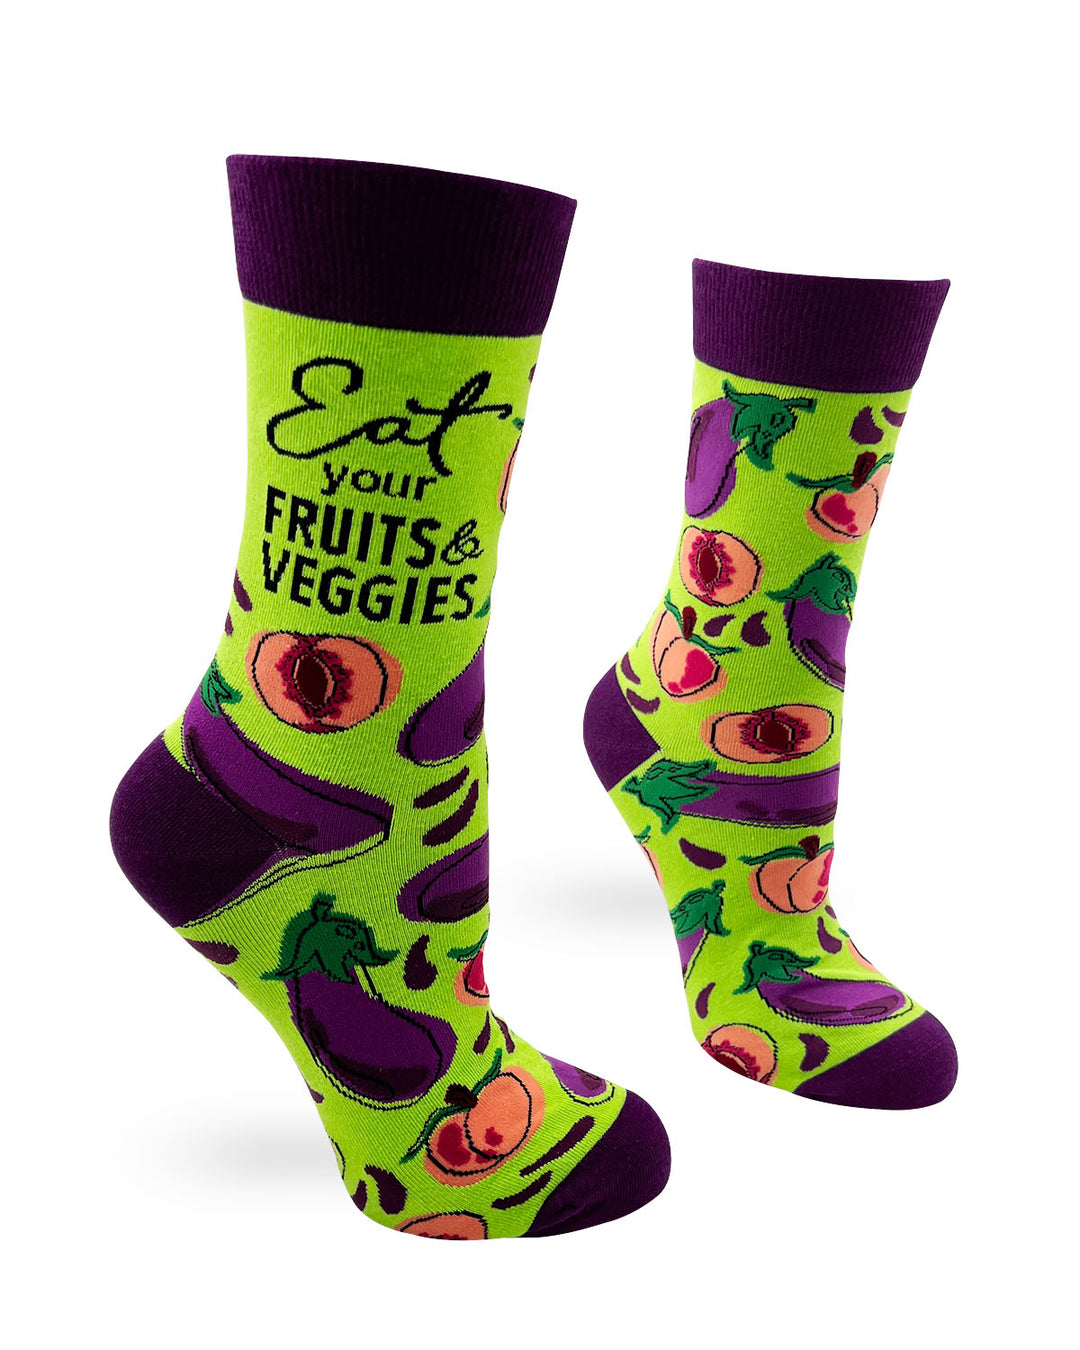 Eat Your Fruits and Veggies Funny Ladies' Novelty Crew Socks